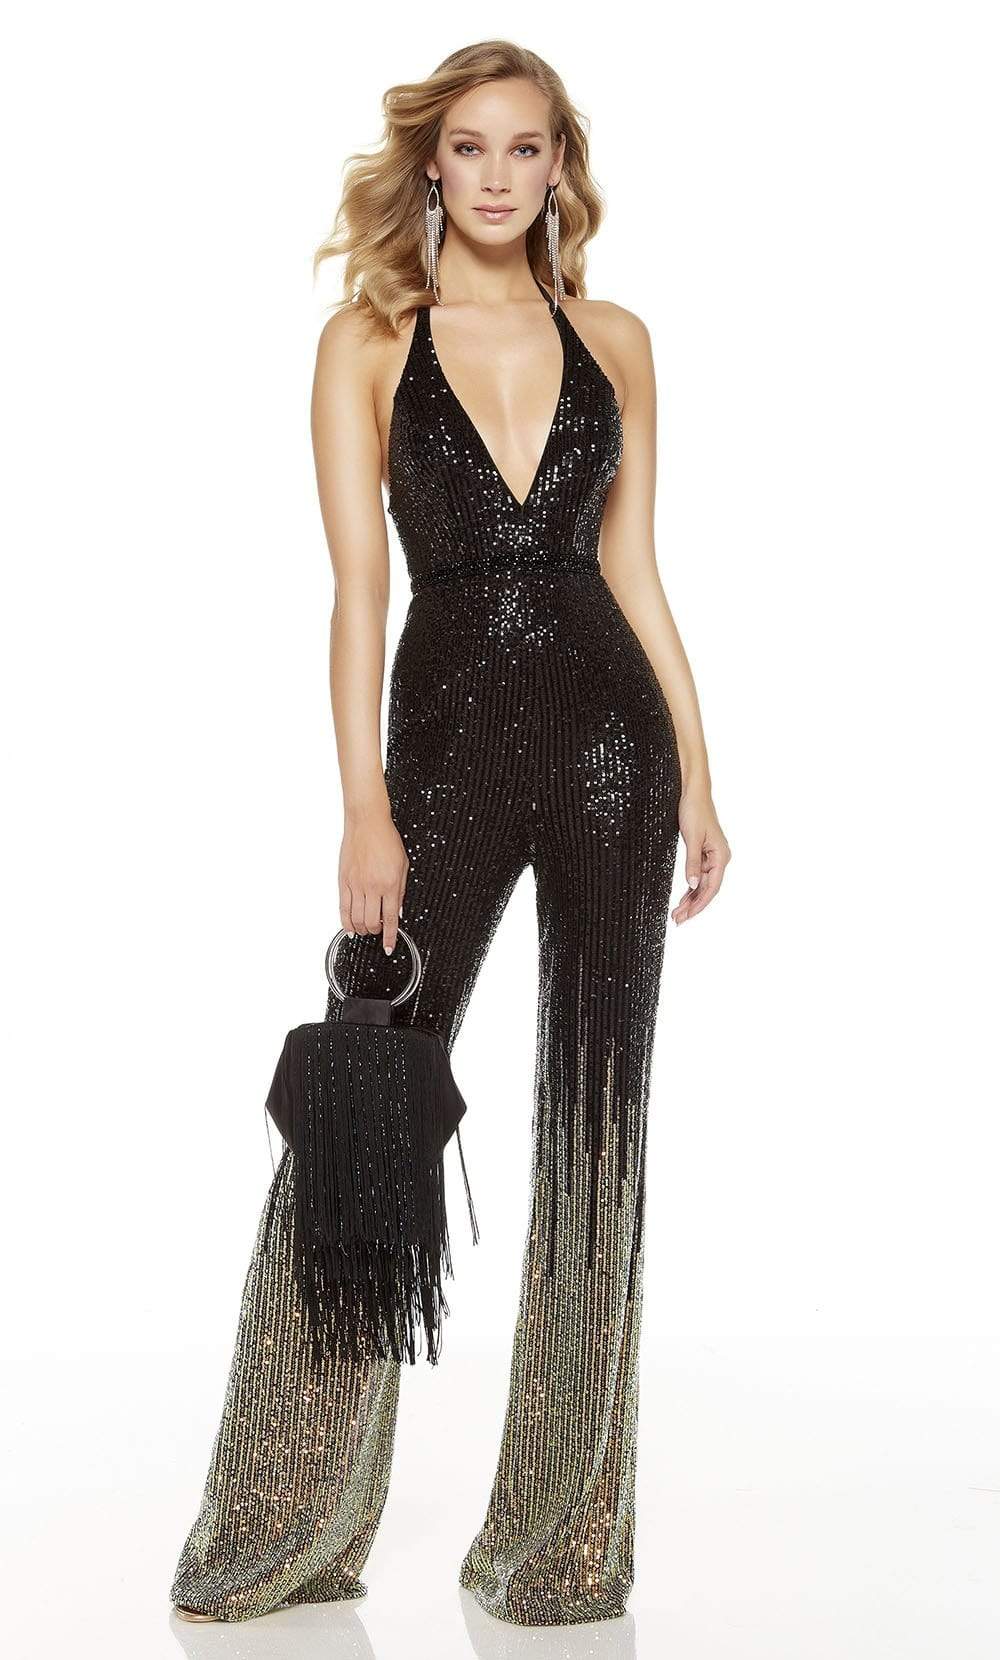 Alyce Paris - Ombre Sequined Jumpsuit 60837SC
 In Black and Gold